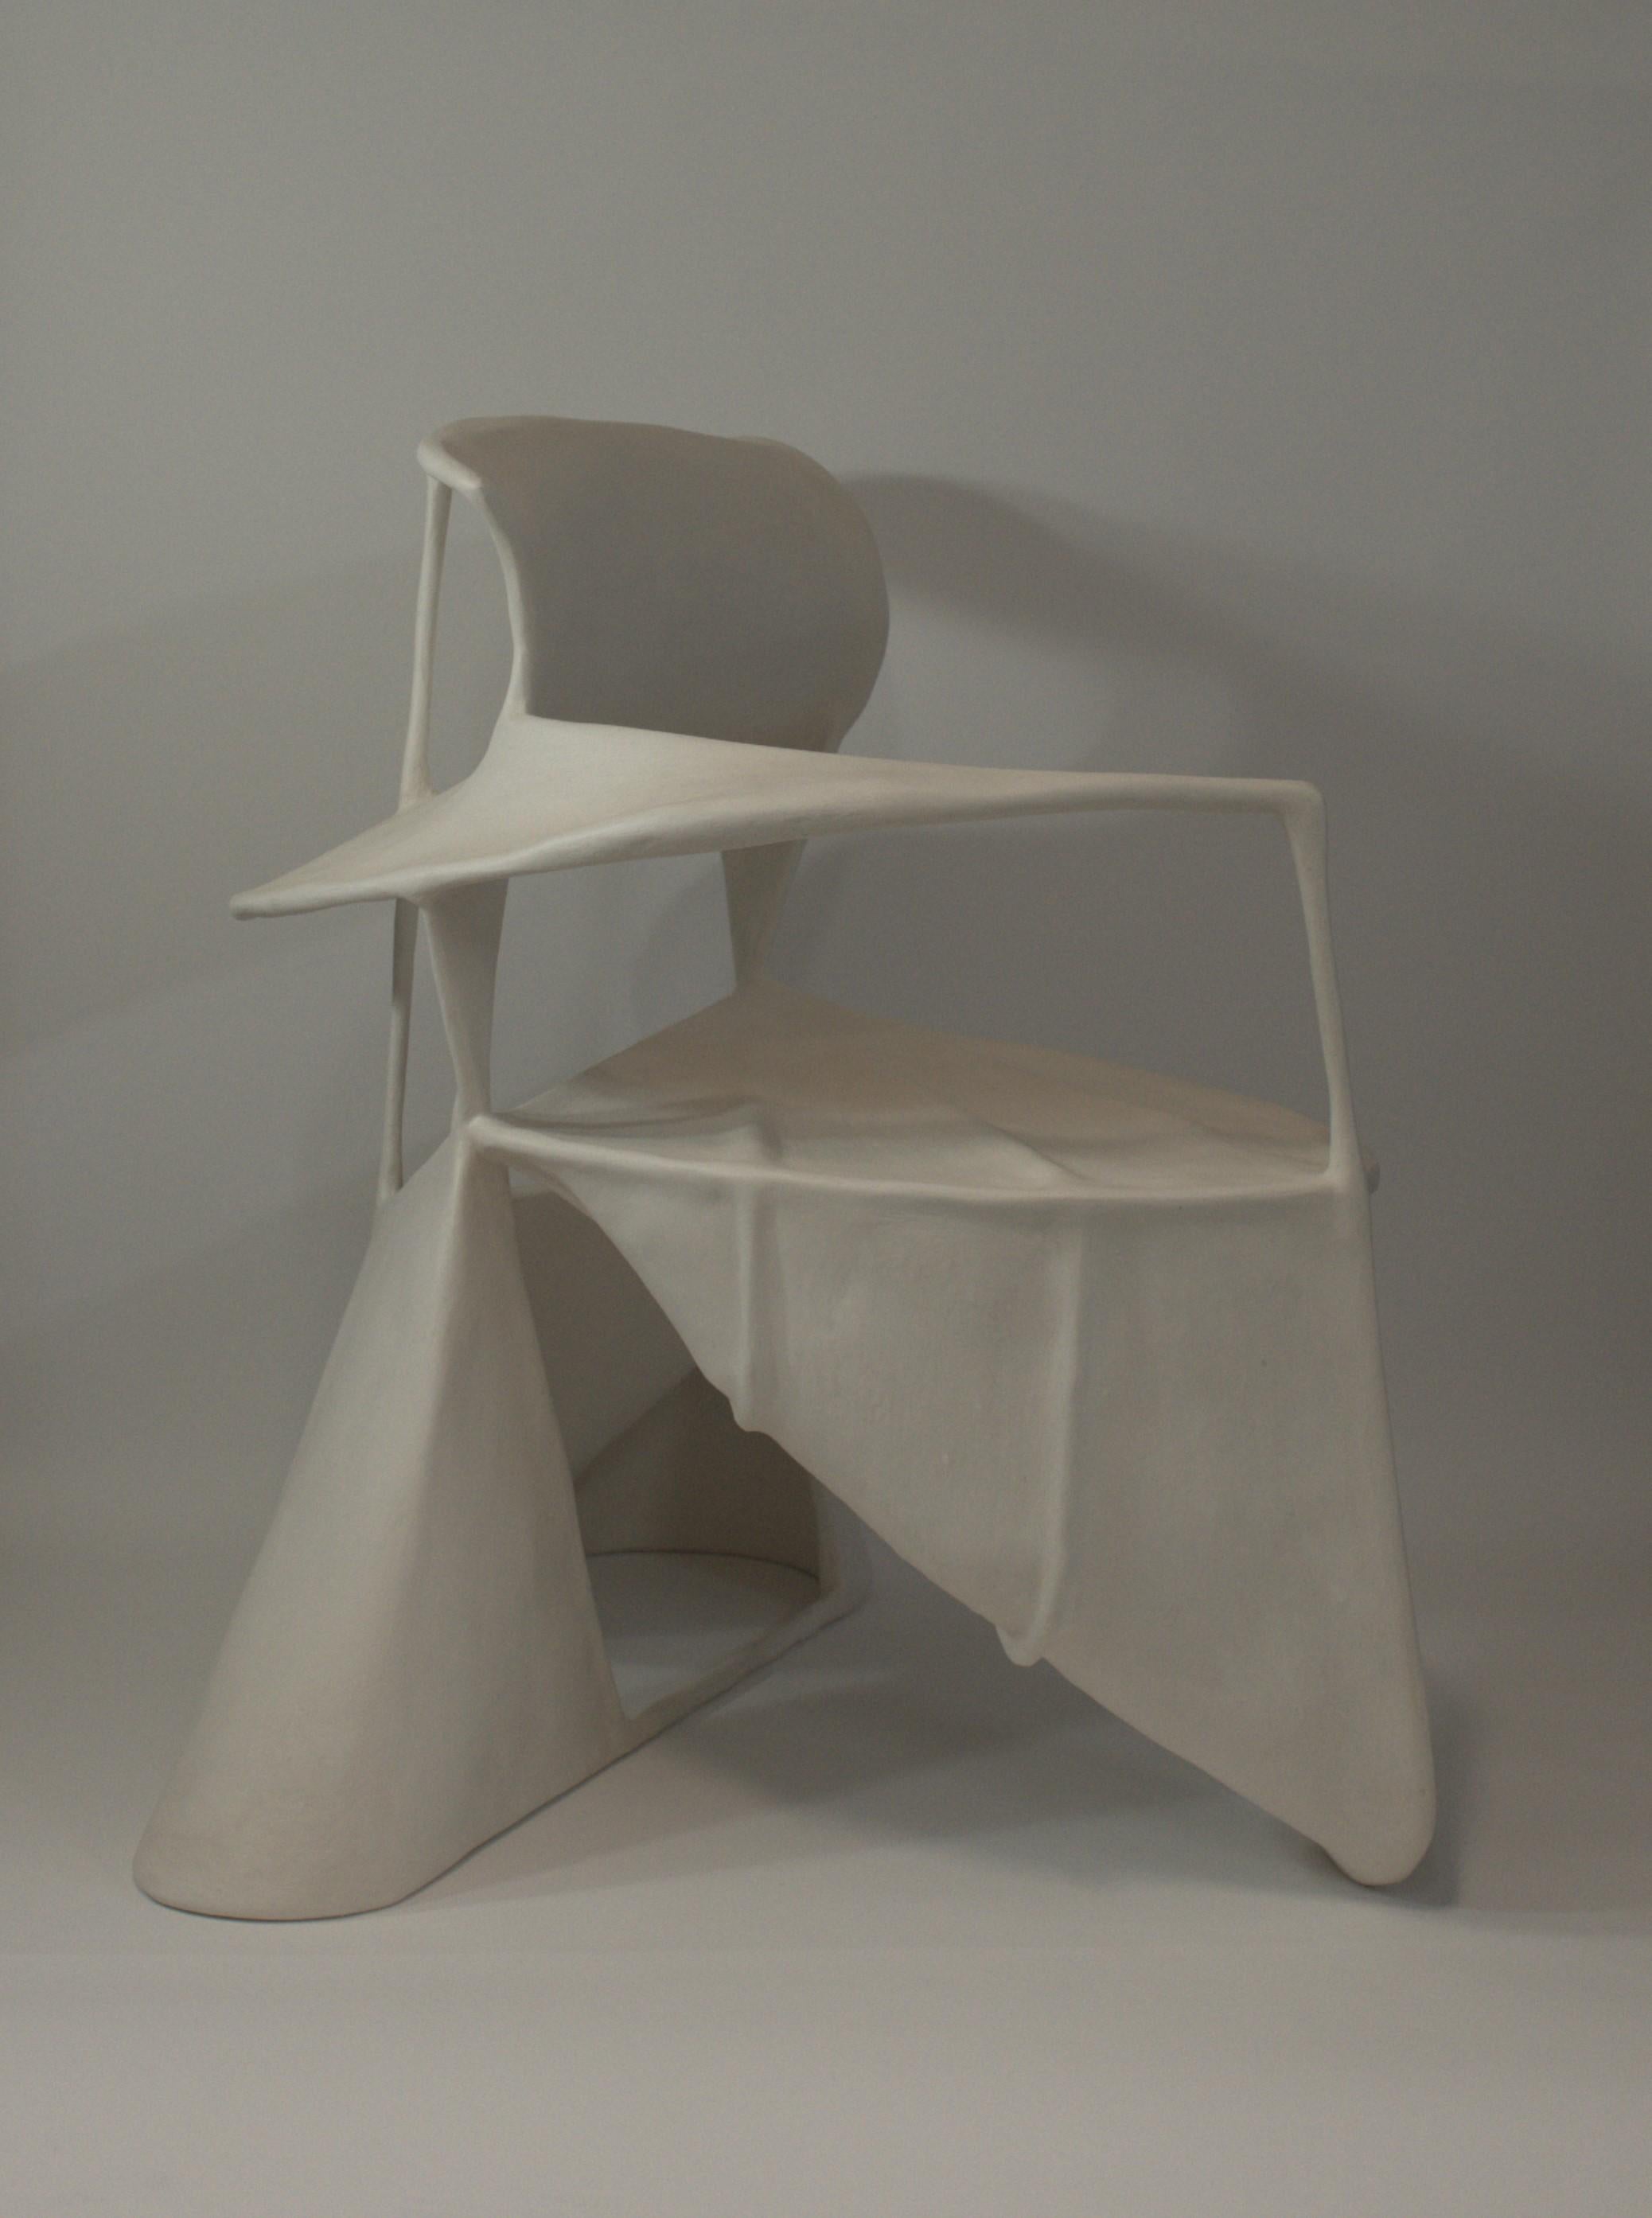 Lacquered Contemporary Design White Textured Curved Sculptures Chair by Jordan van der Ven For Sale